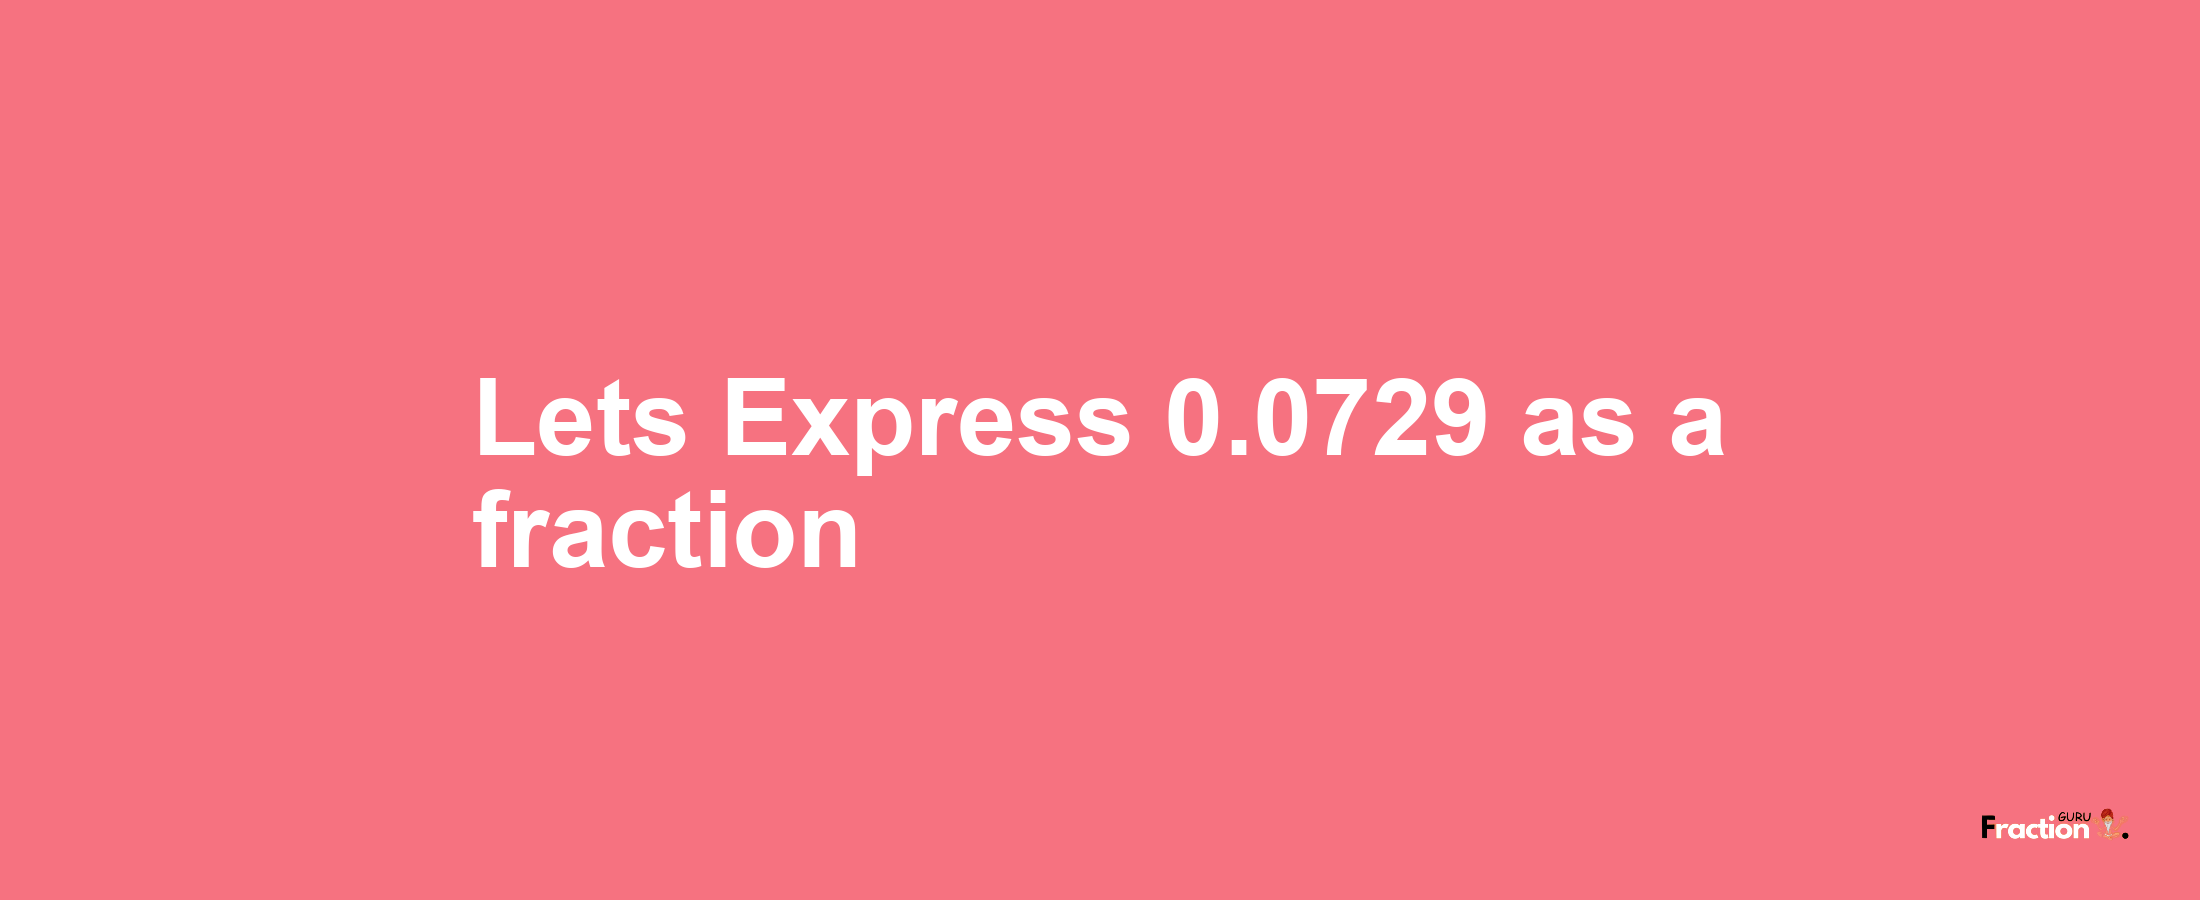 Lets Express 0.0729 as afraction